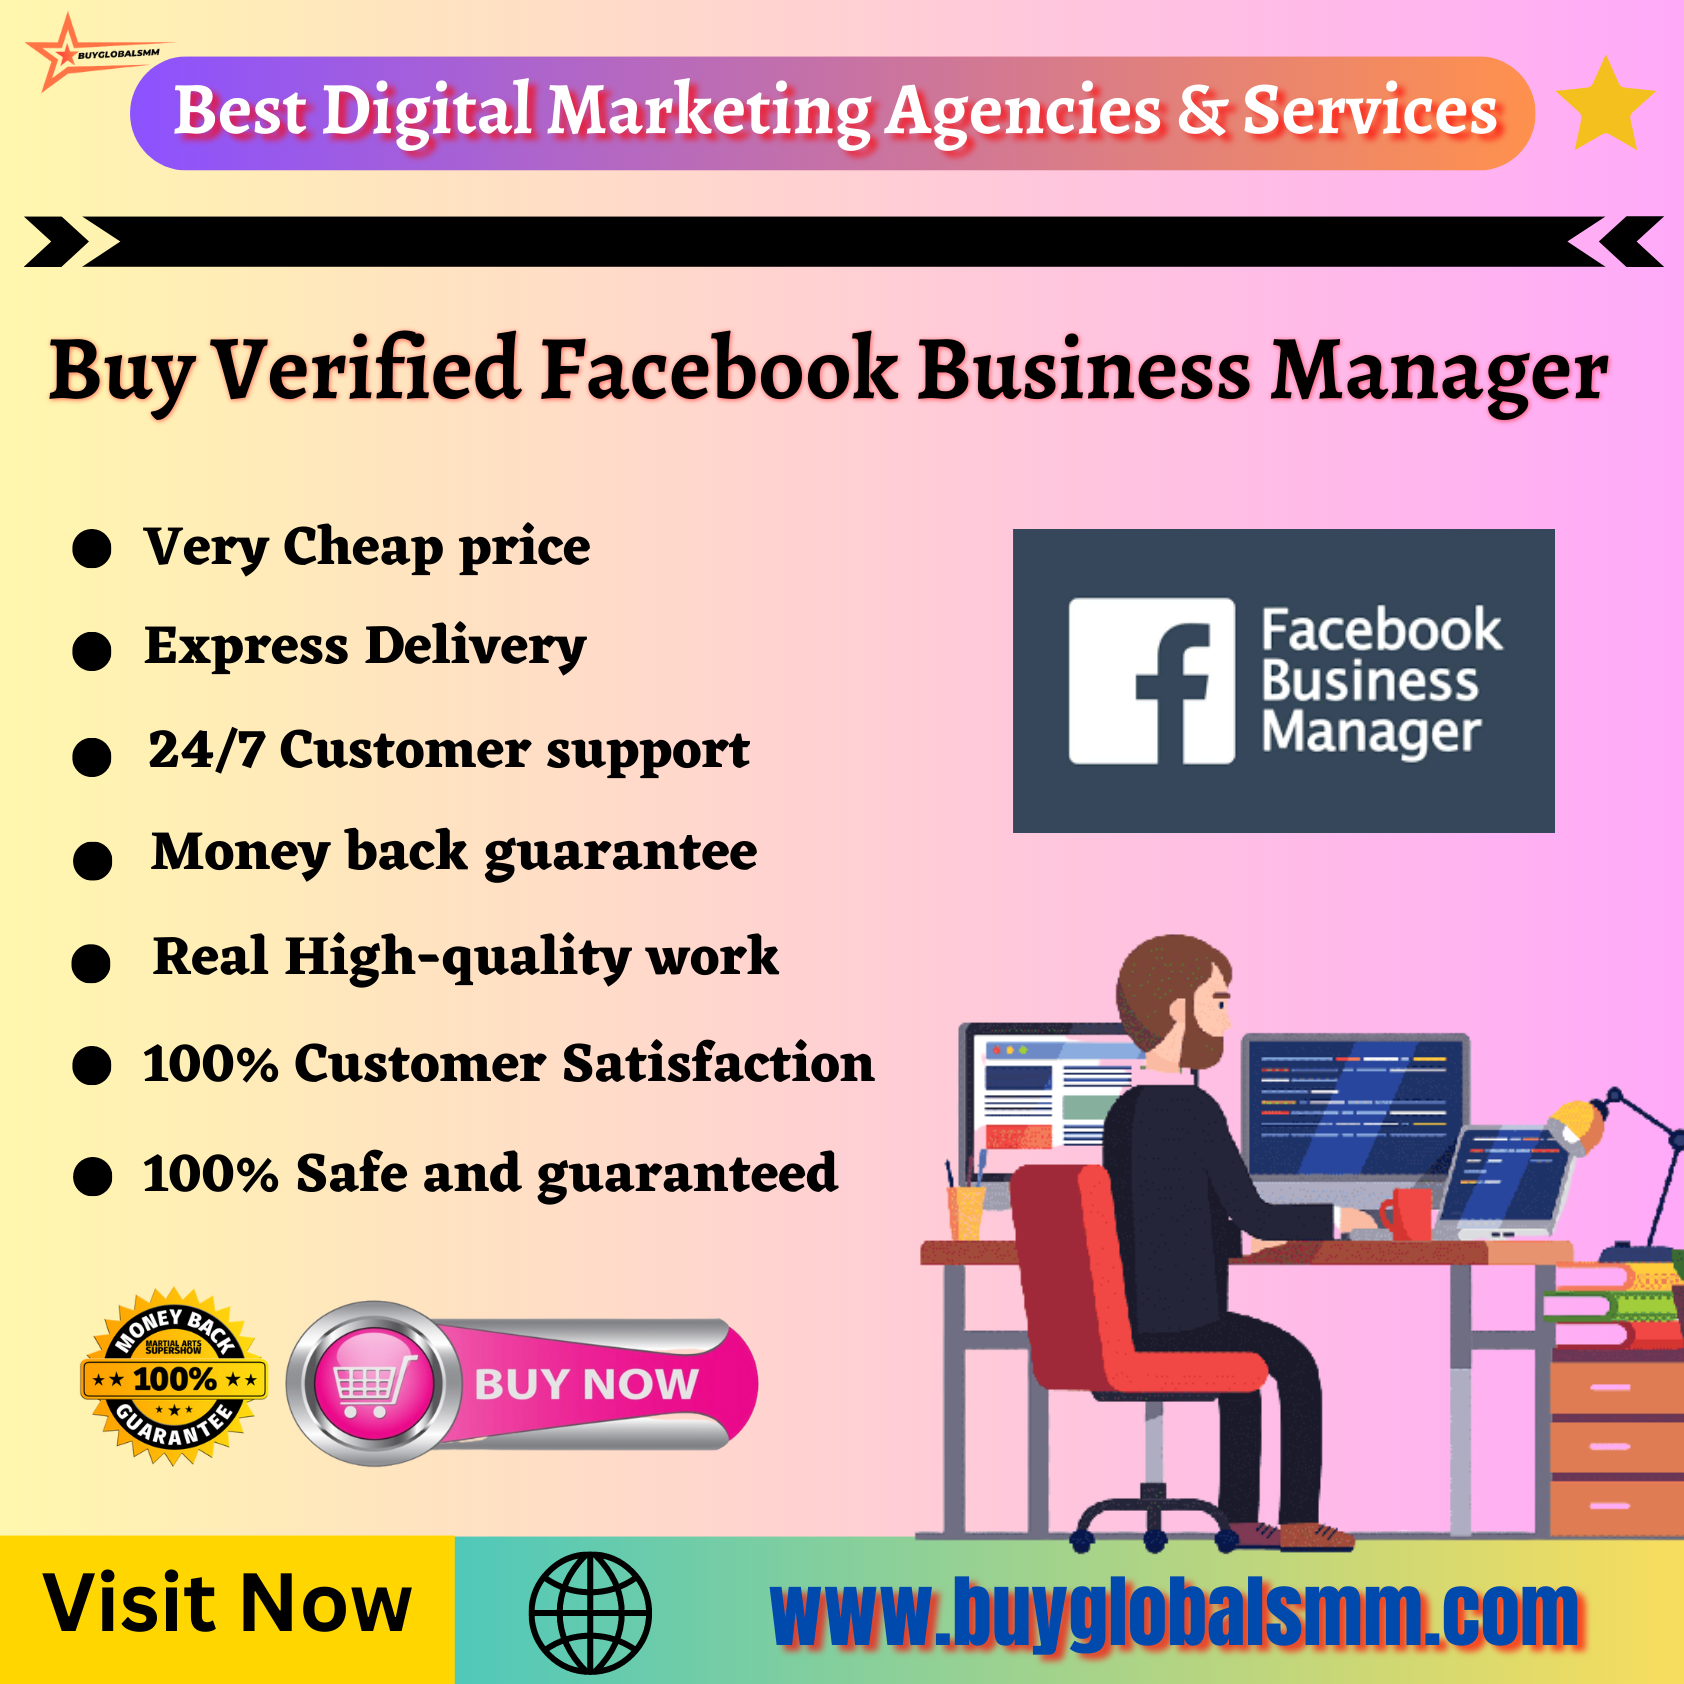 Buy Verified Facebook Business Manager-100% full verified BM